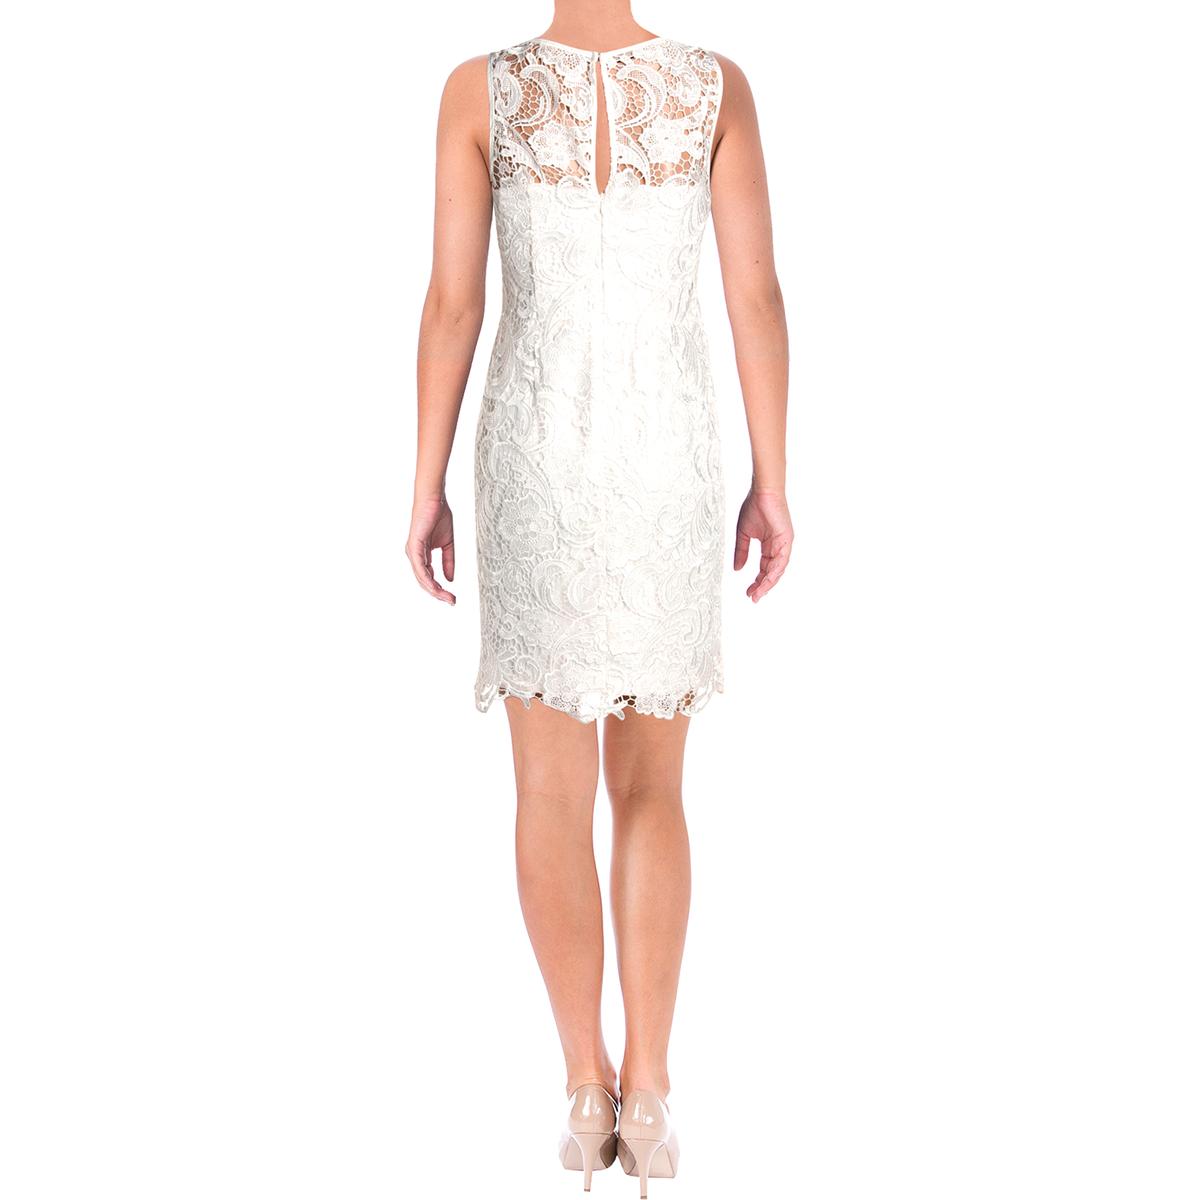 Adrianna Papell Womens Ivory Lace Sleeveless Party Cocktail Dress 2 ...